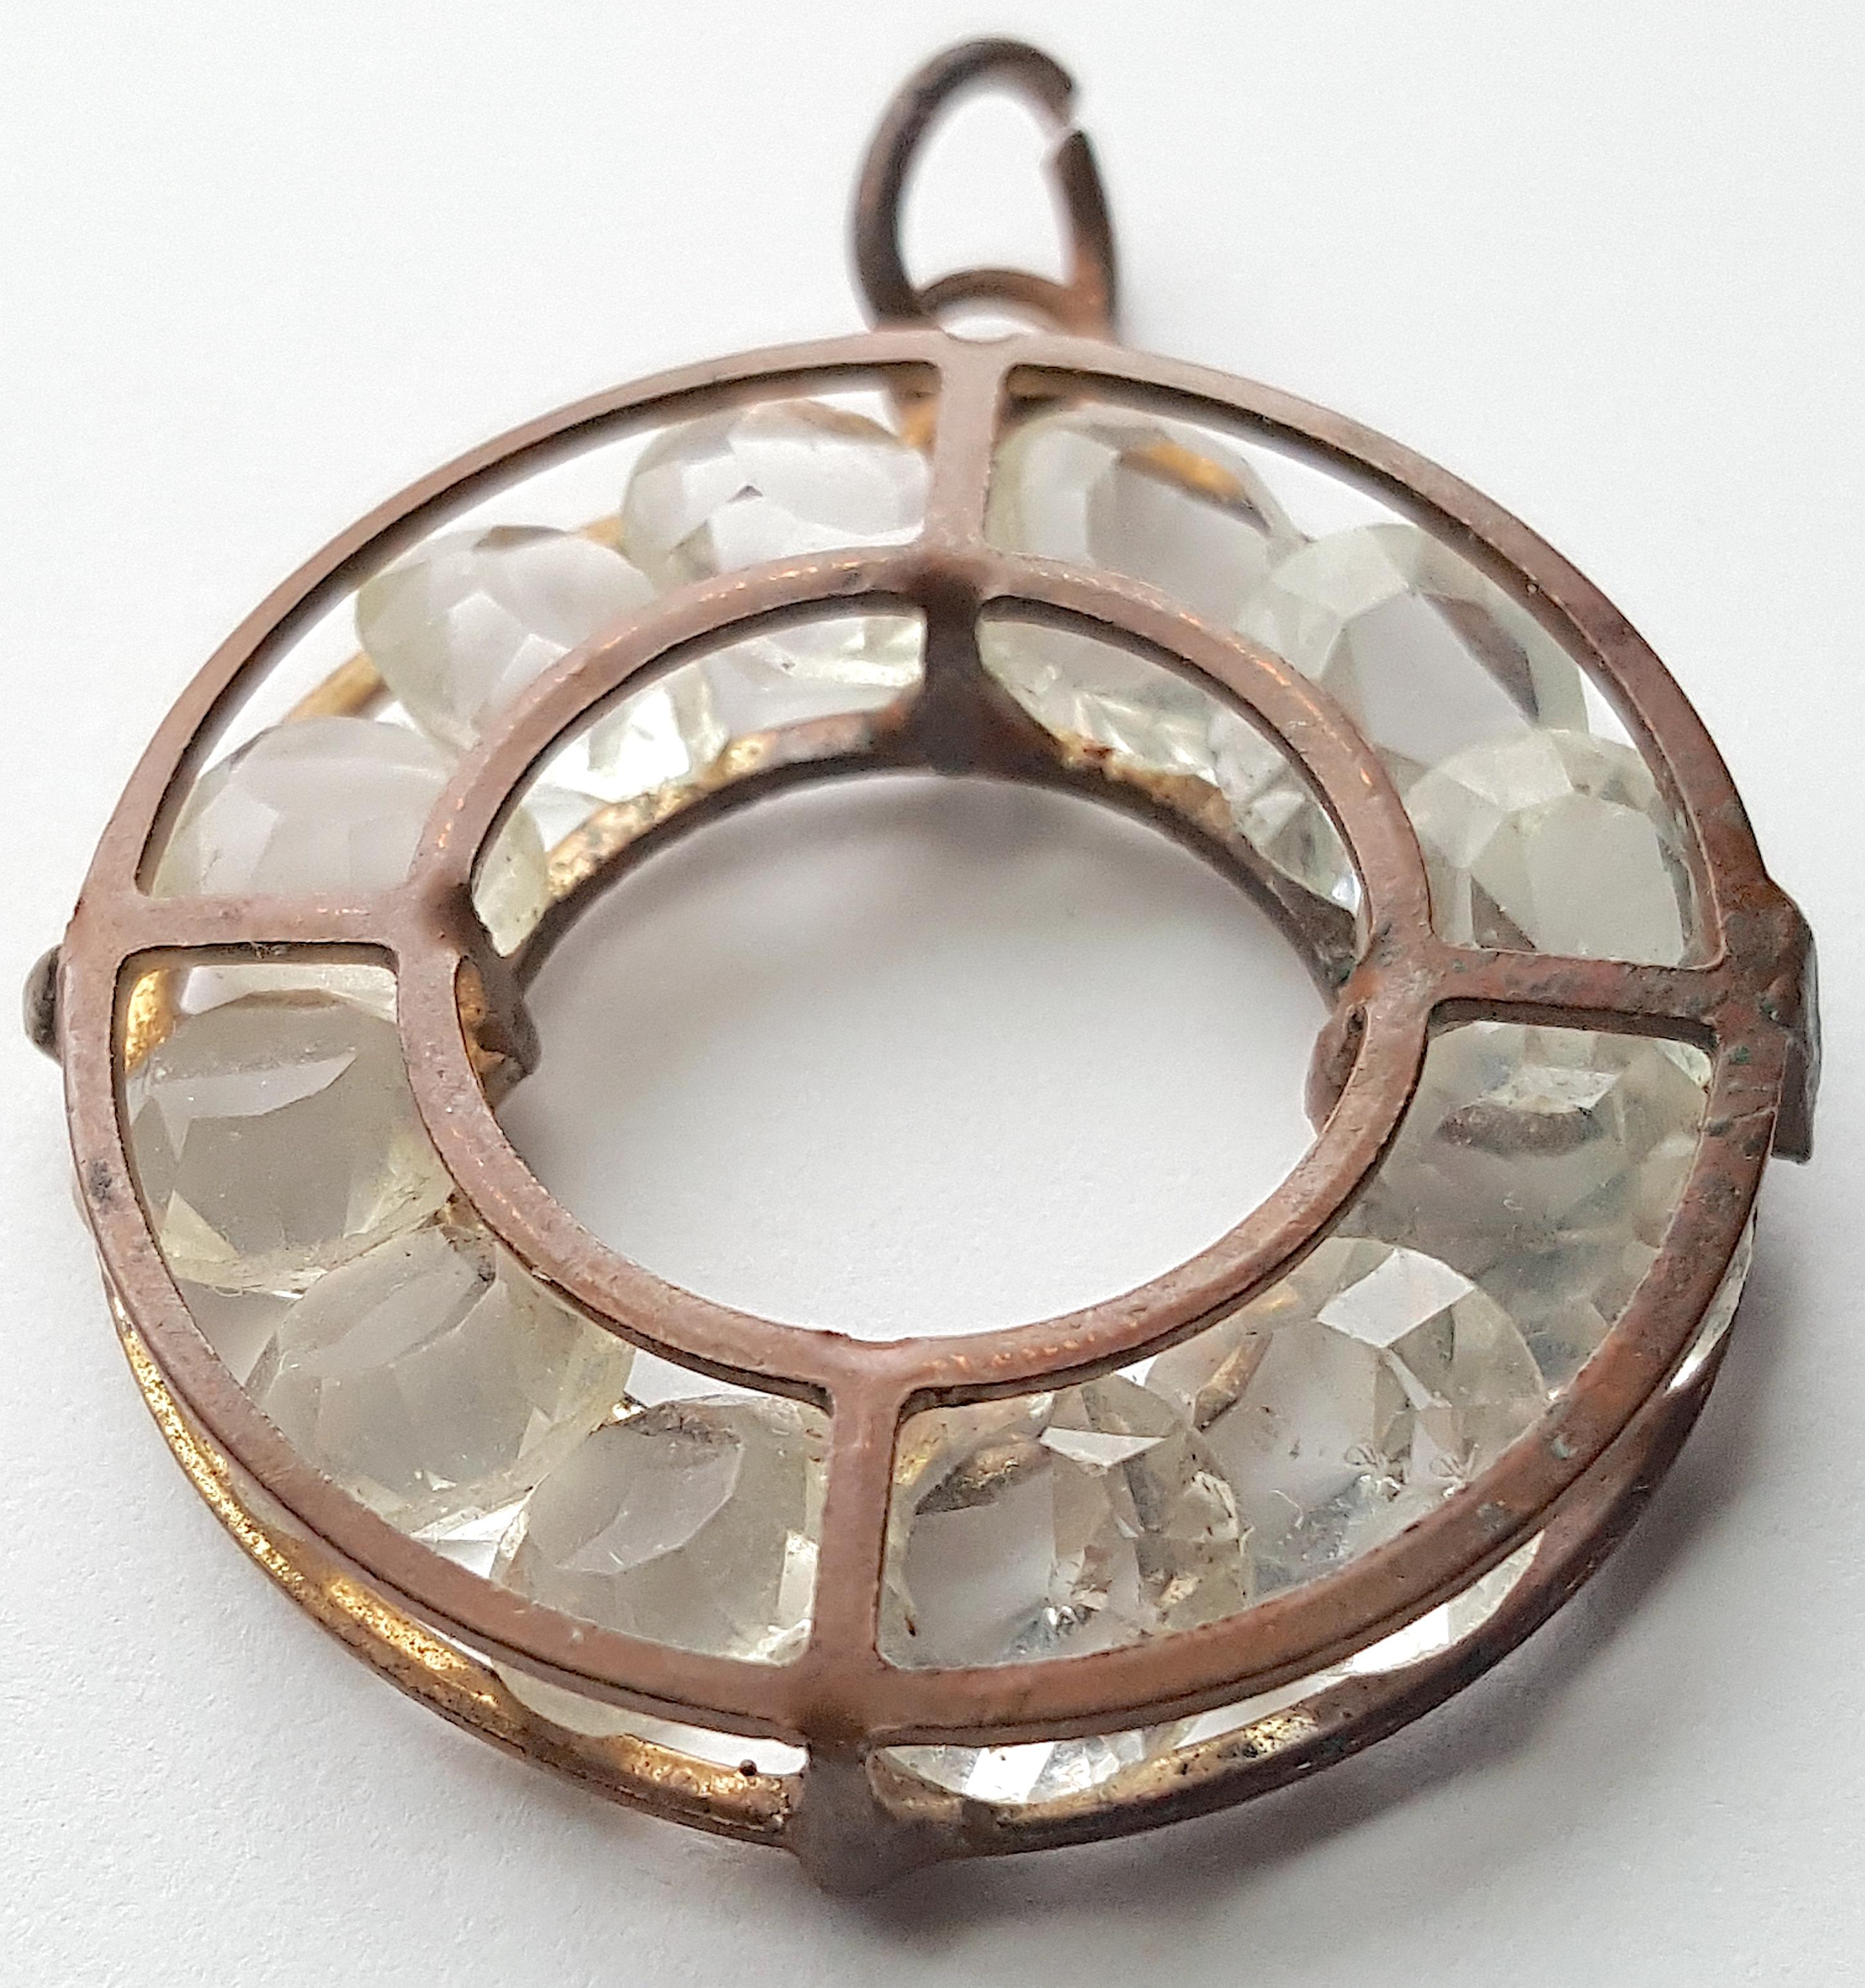 This antique amuletic bronze framed pendant cages a dozen single-cut rock crystals that each feature a table-cut decagon crown, deep pavilion, 21 facets, uncut girdle, and 7mm diameter. They are tightly set within four linked rings to overlap at the